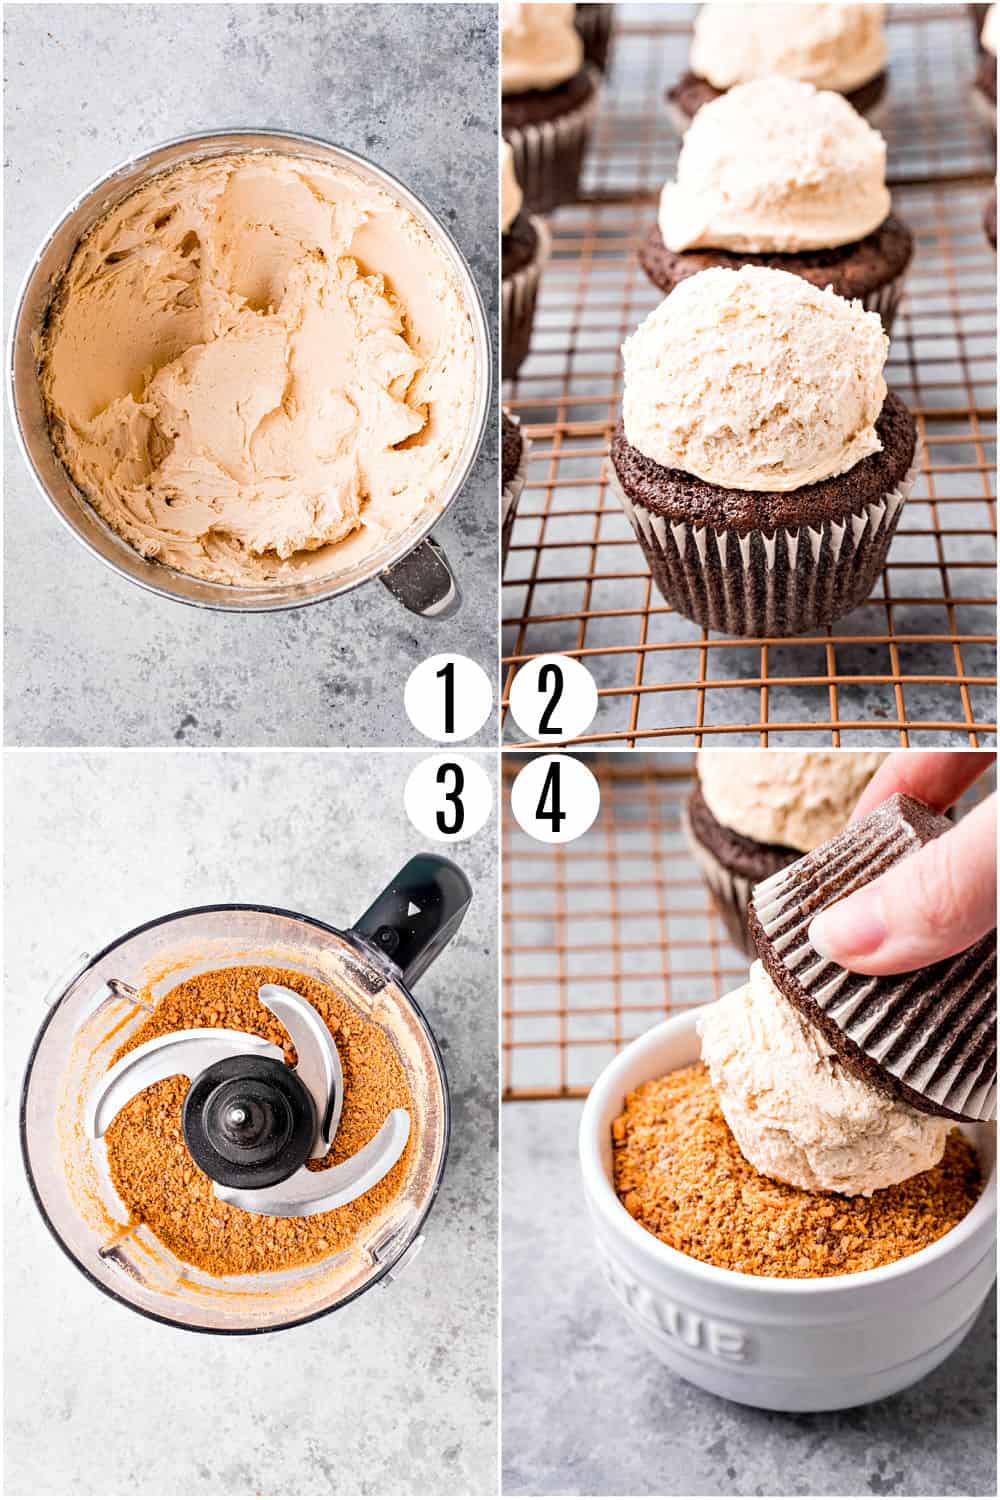 Step by step photos showing how to make butterfinger frosting.